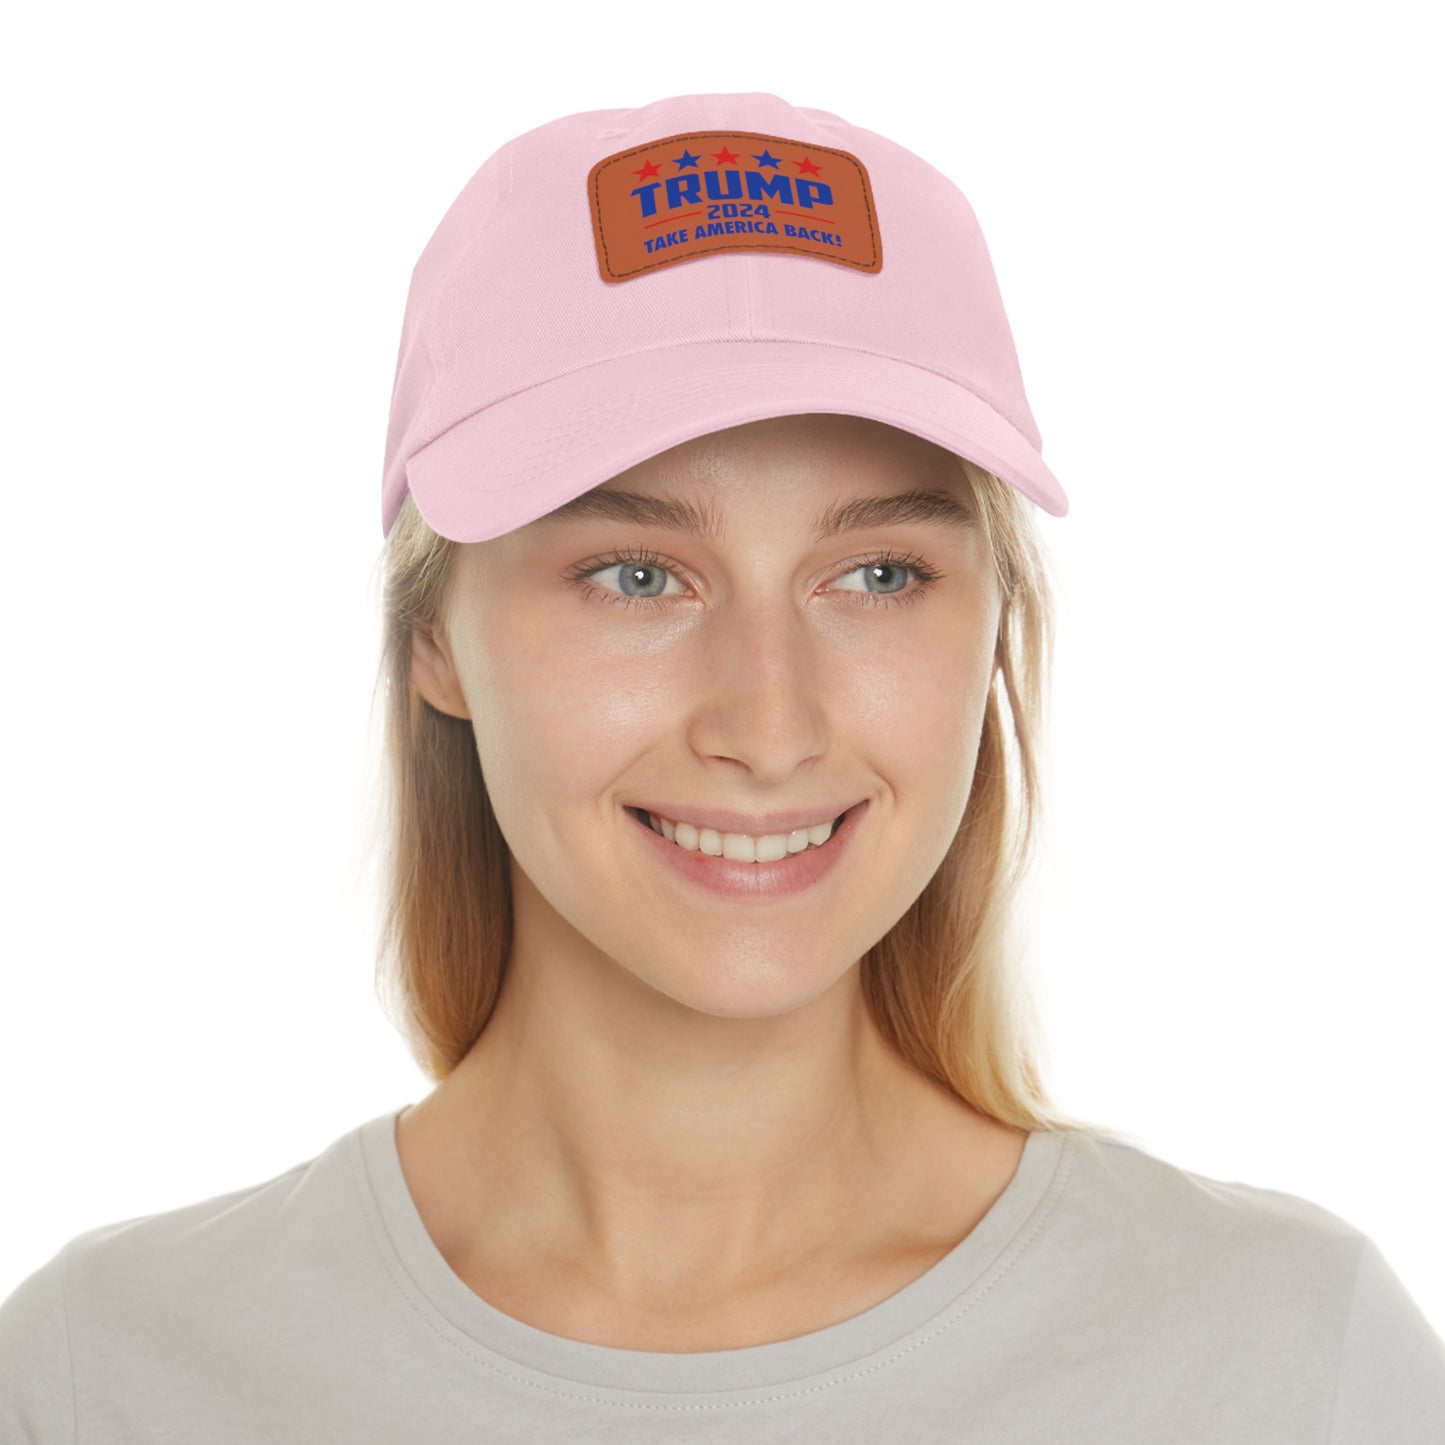 Trump 2024 Dad Hat with Leather Patch (Rectangle)